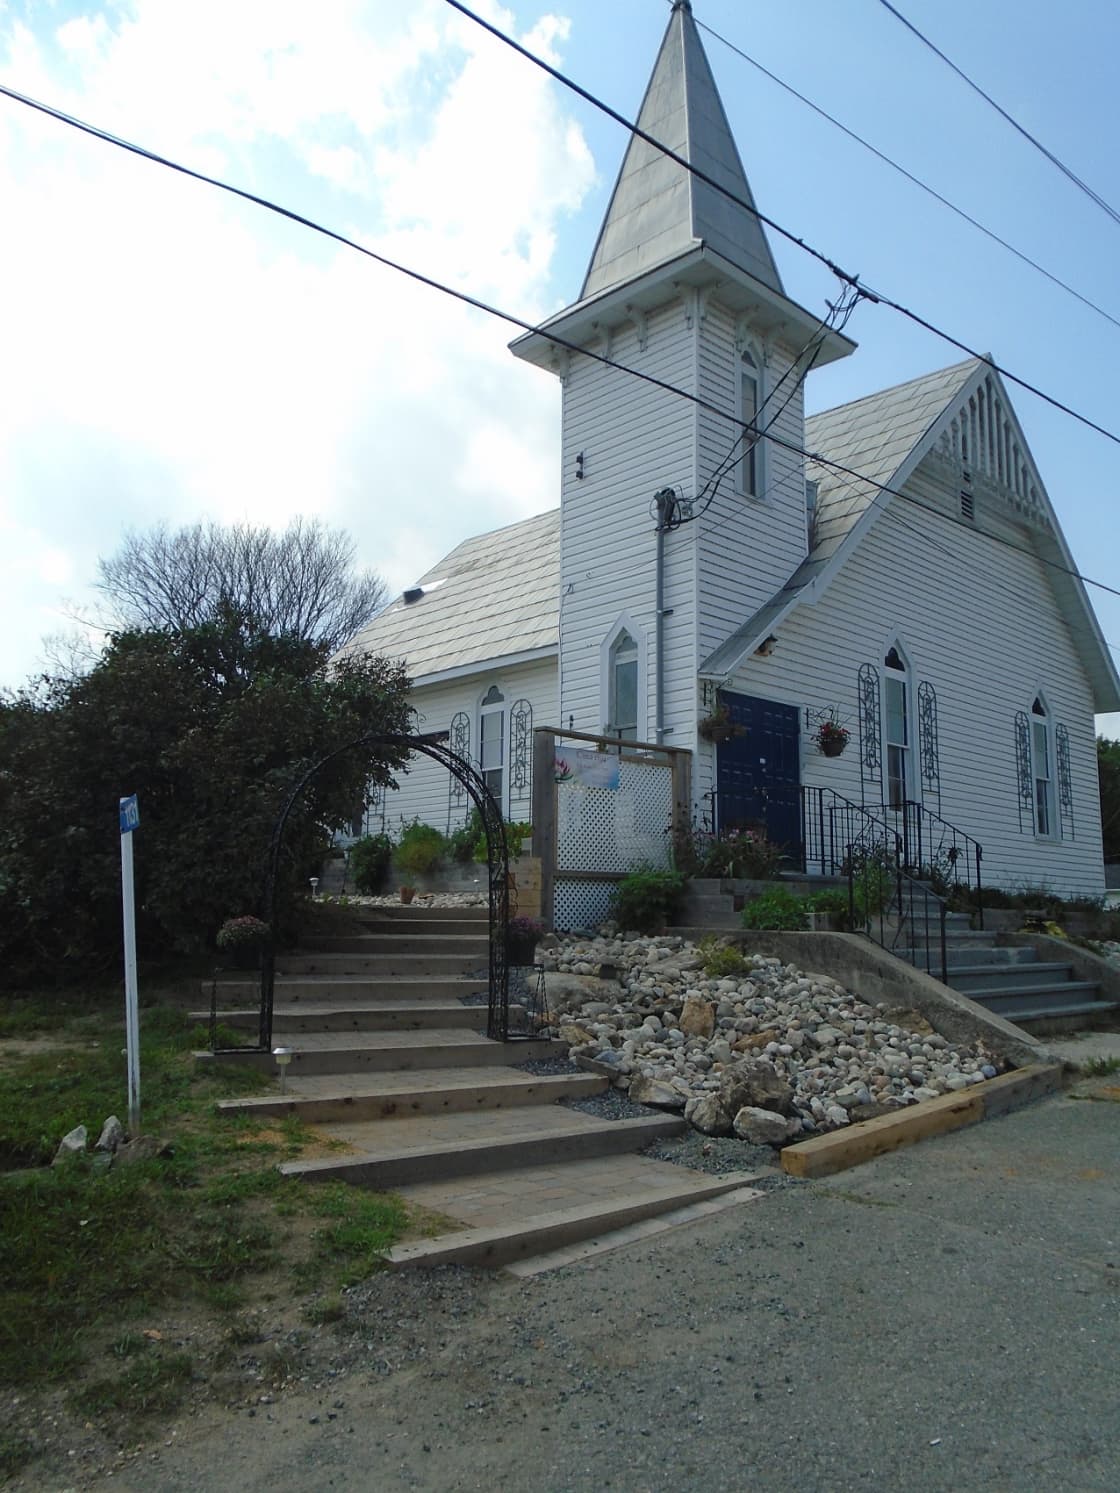 The Church on the Hill was renovated in 2013 and turned into a personal residence.